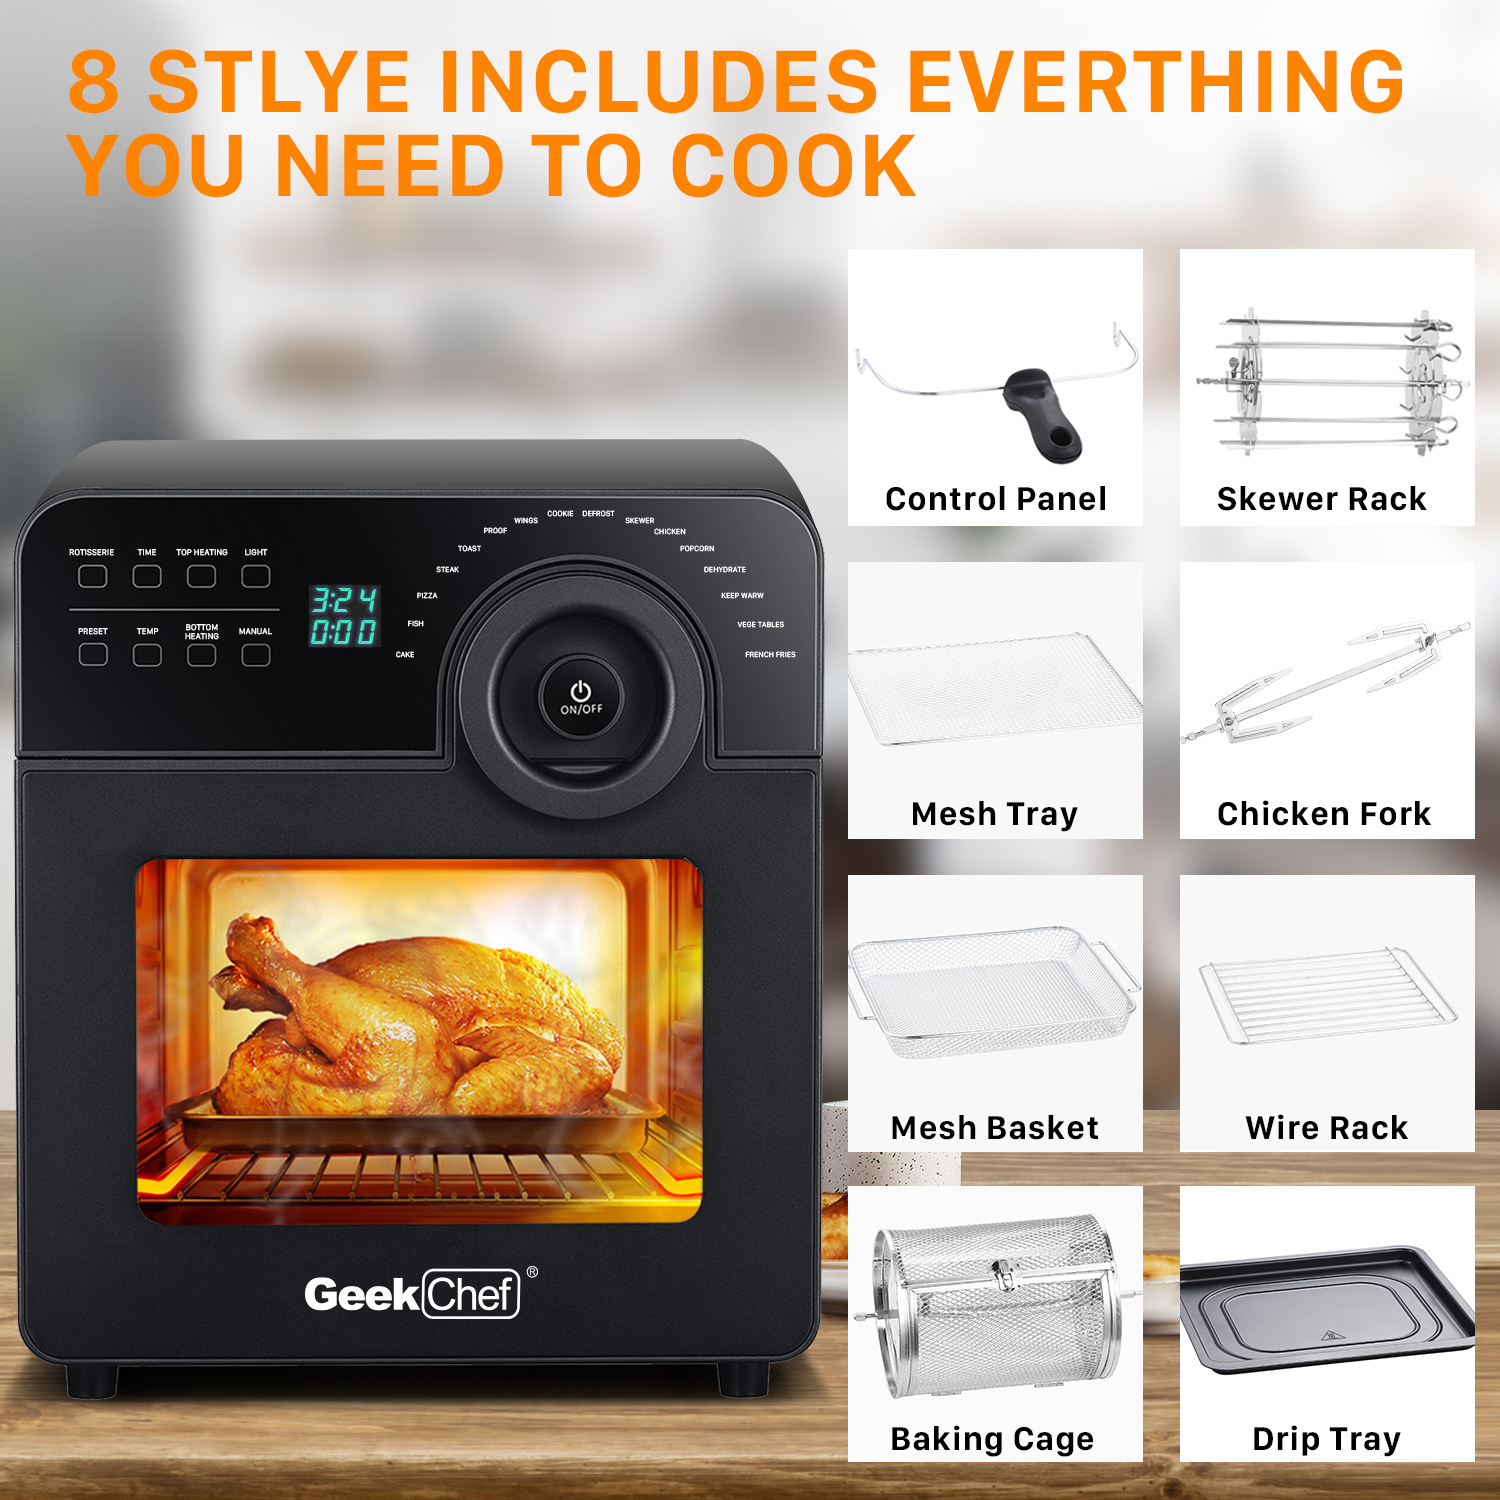 UWR-Nite Electric Air Fry Oven Toaster Convection Smart Oven, Countertop Rotisserie Multi-Function 16-in-1 Preset Modes Recipe 15Qt 8 Accessories Black Reheat 1700W - image 3 of 6